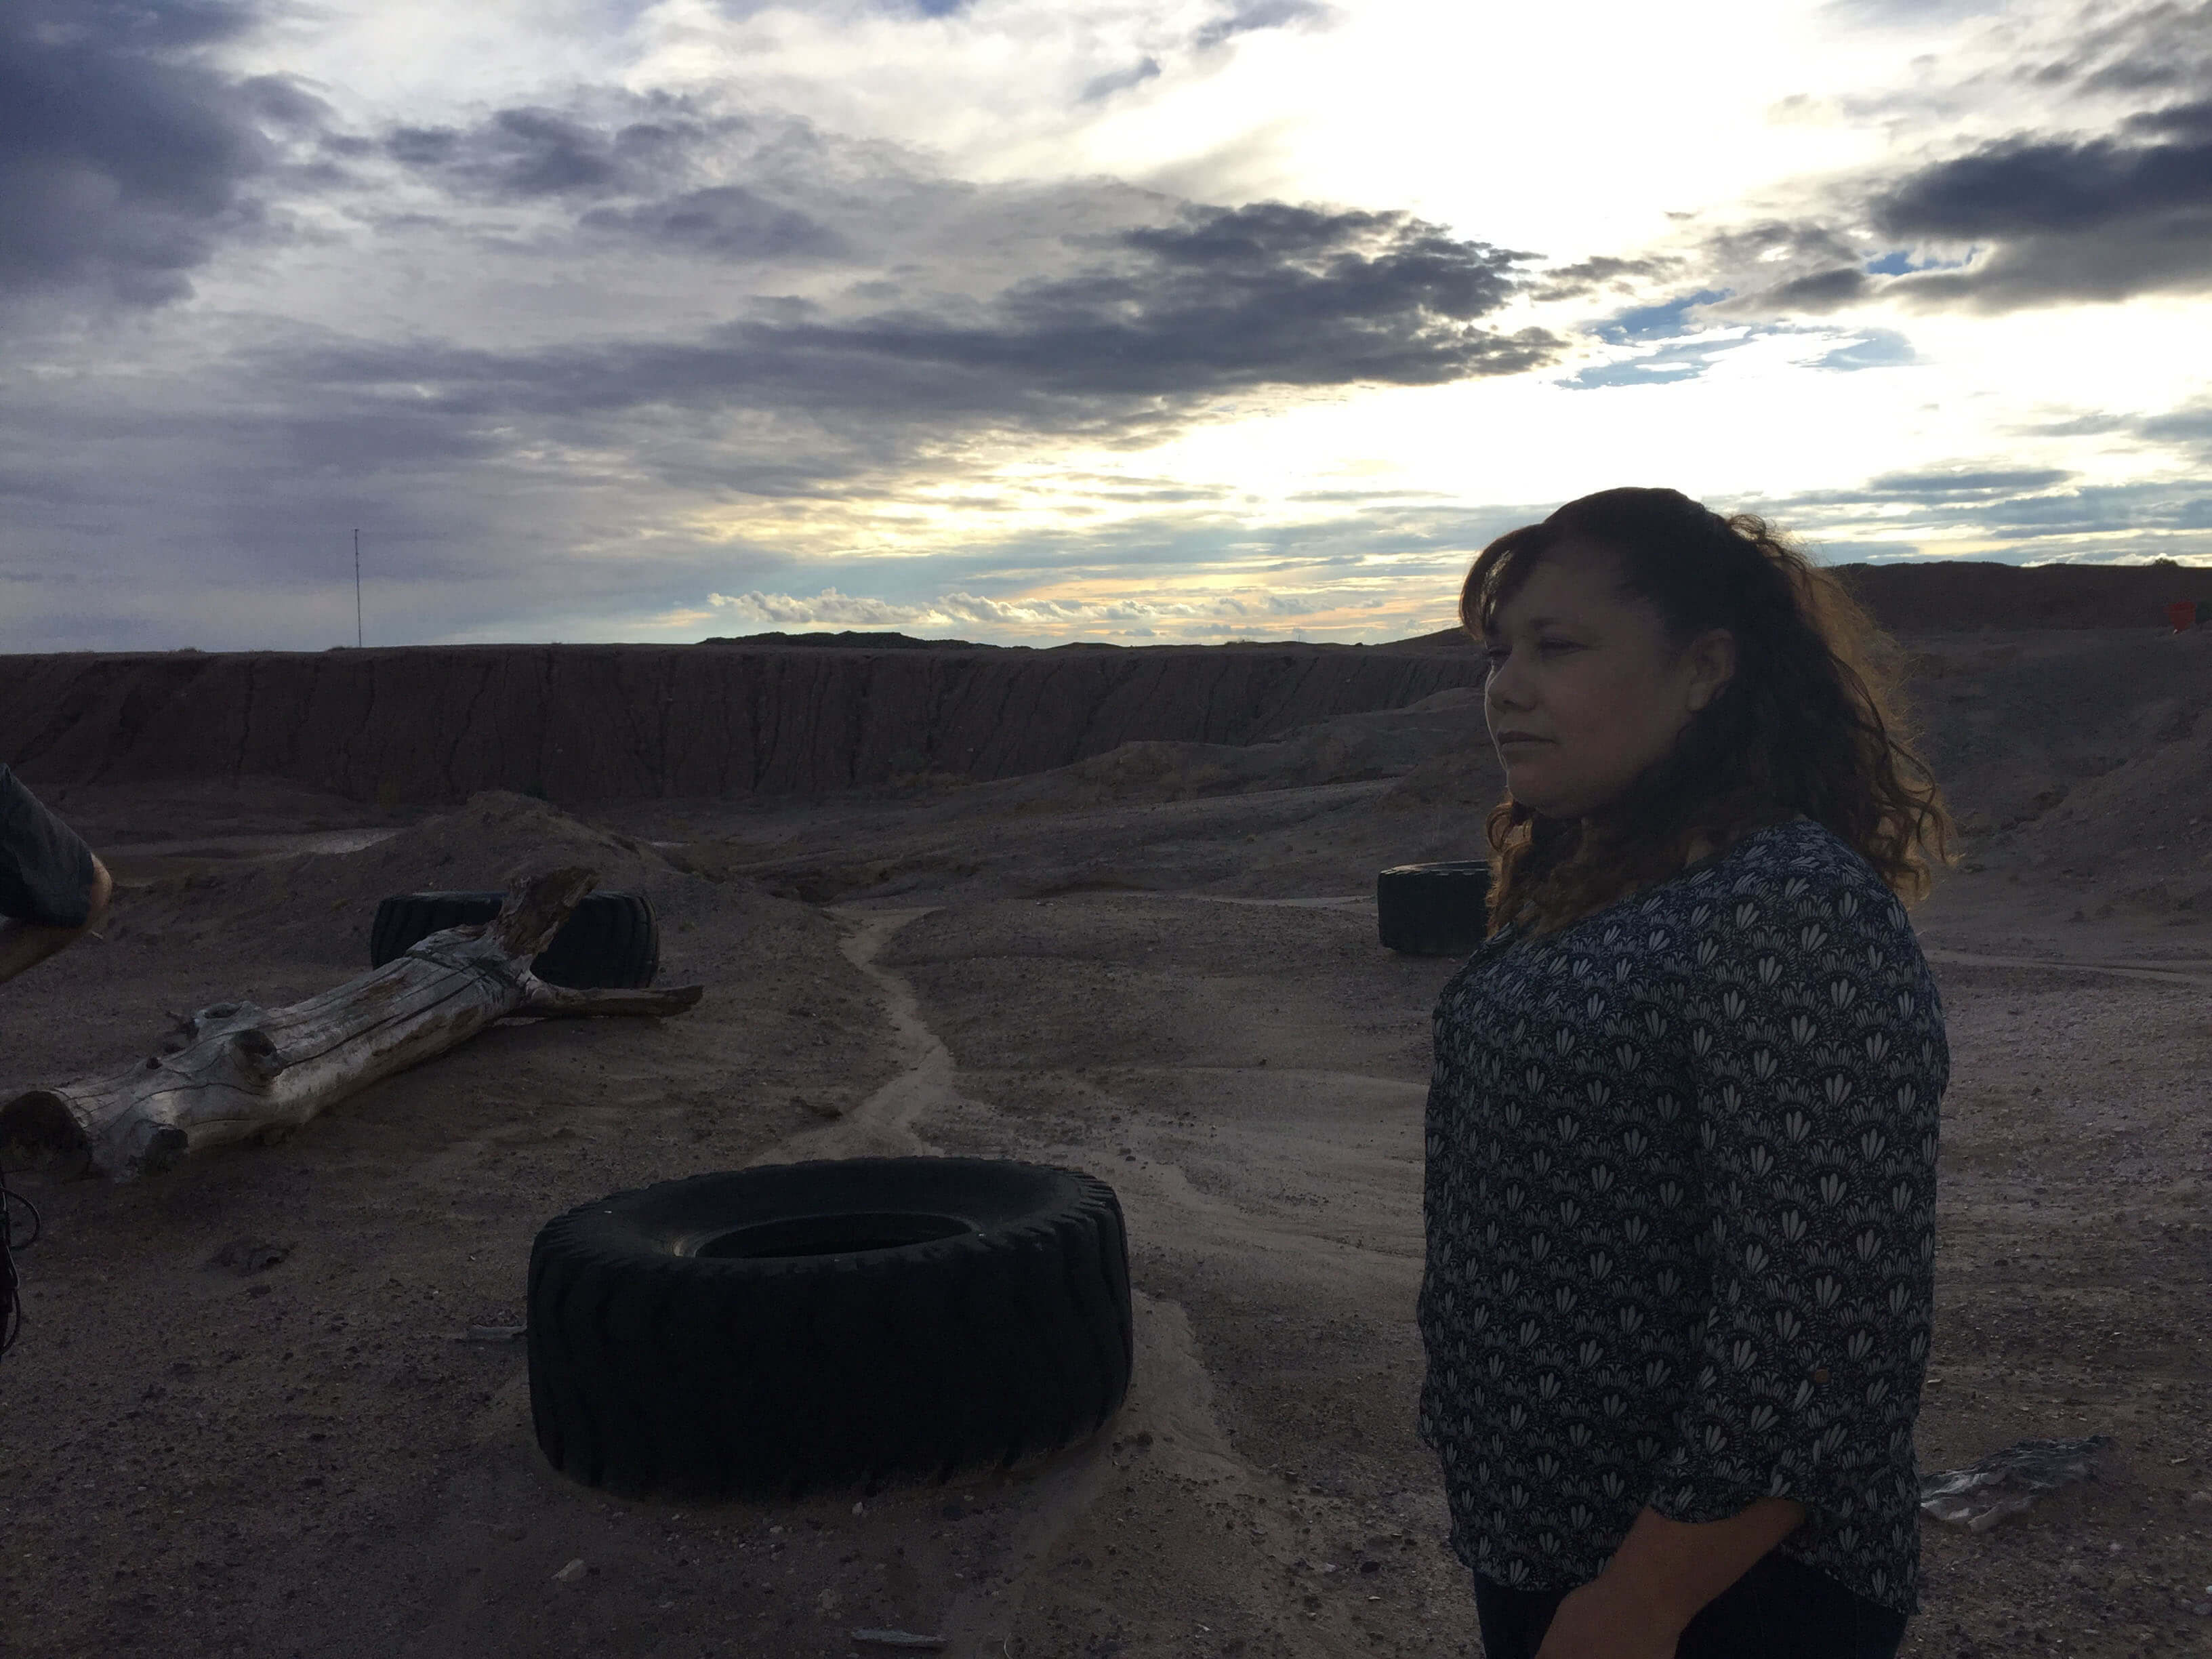 A still from The Guardian of Memory. A photo of a person in a dirt valley, looking off into the distance. There is a tire on the ground nearby.